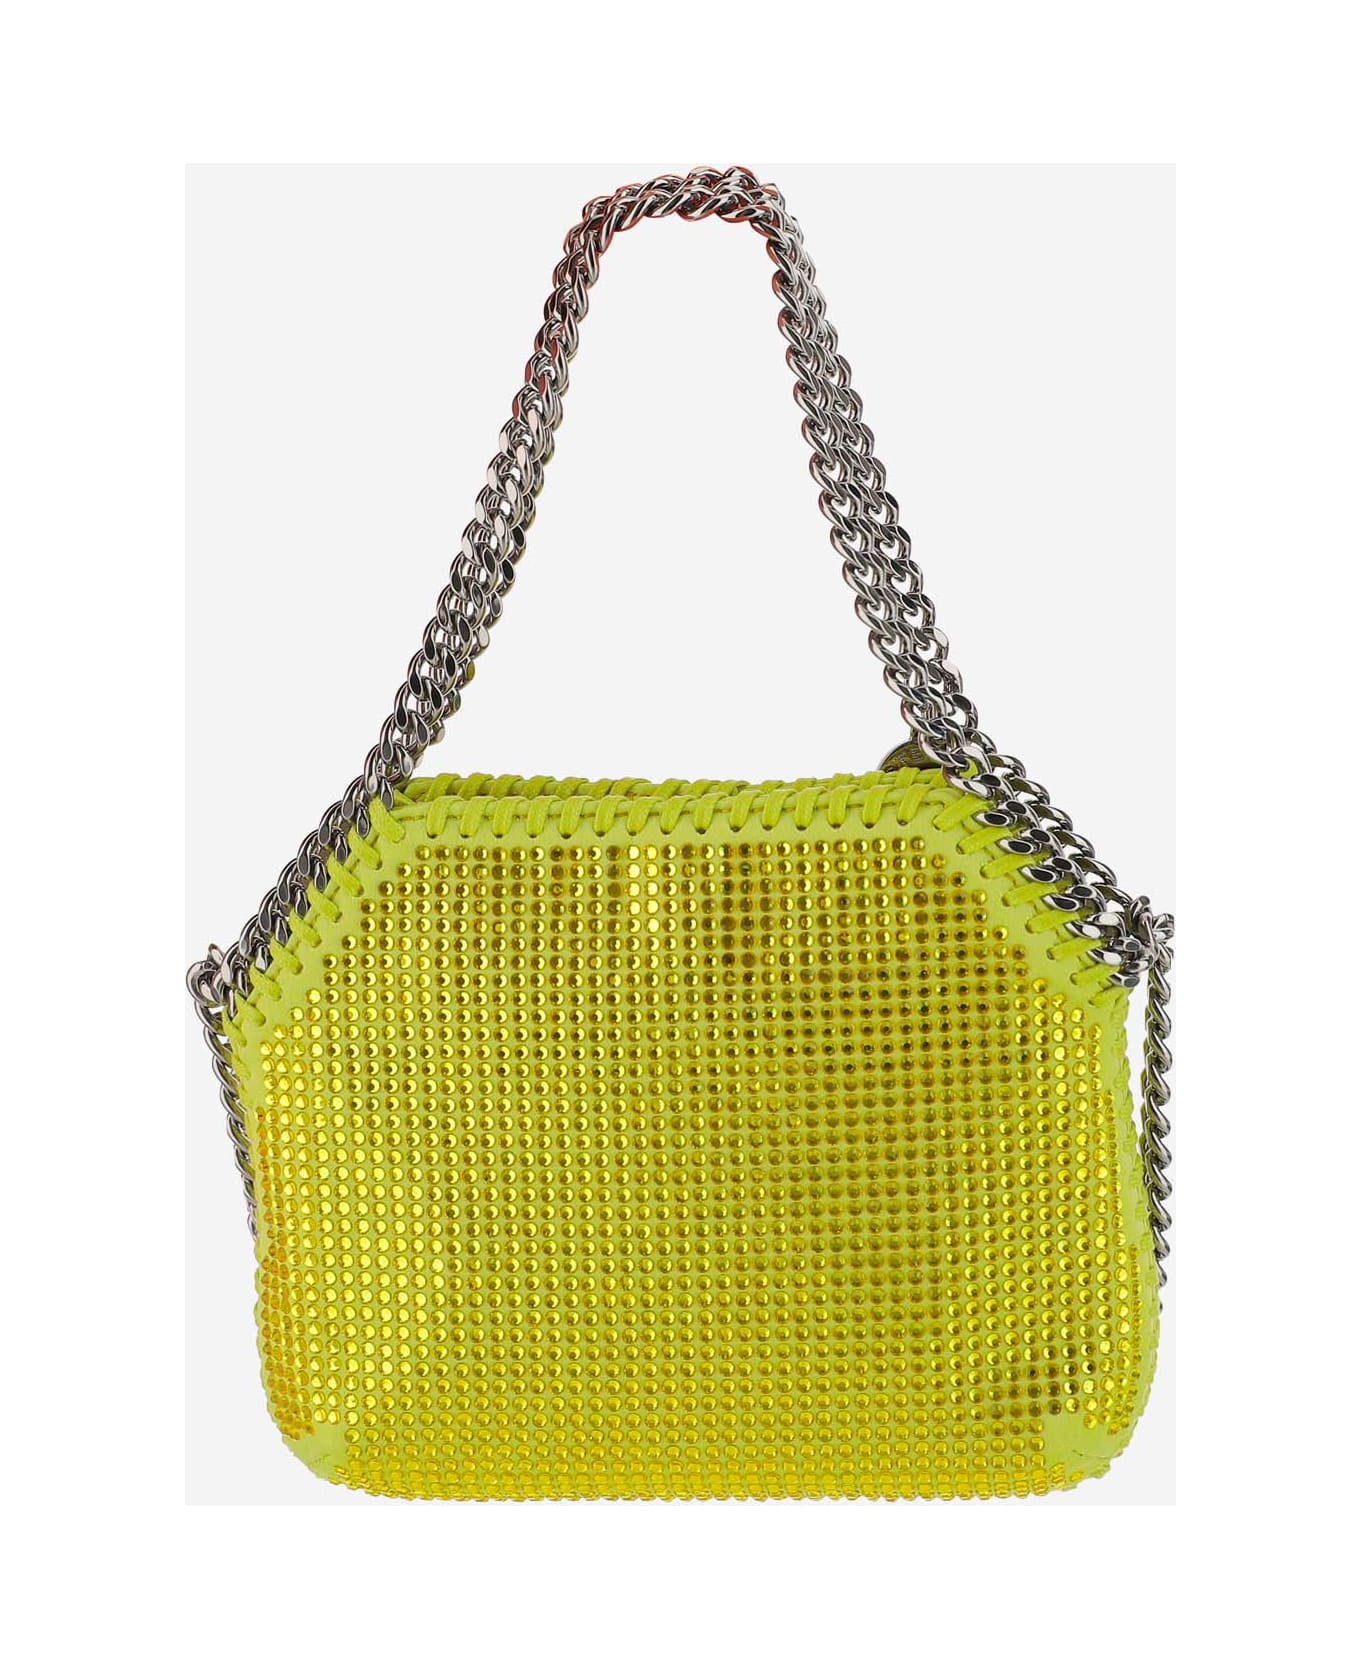 Stella McCartney Mini Shoulder Bag With All-over Crystals - Oxide Yellow